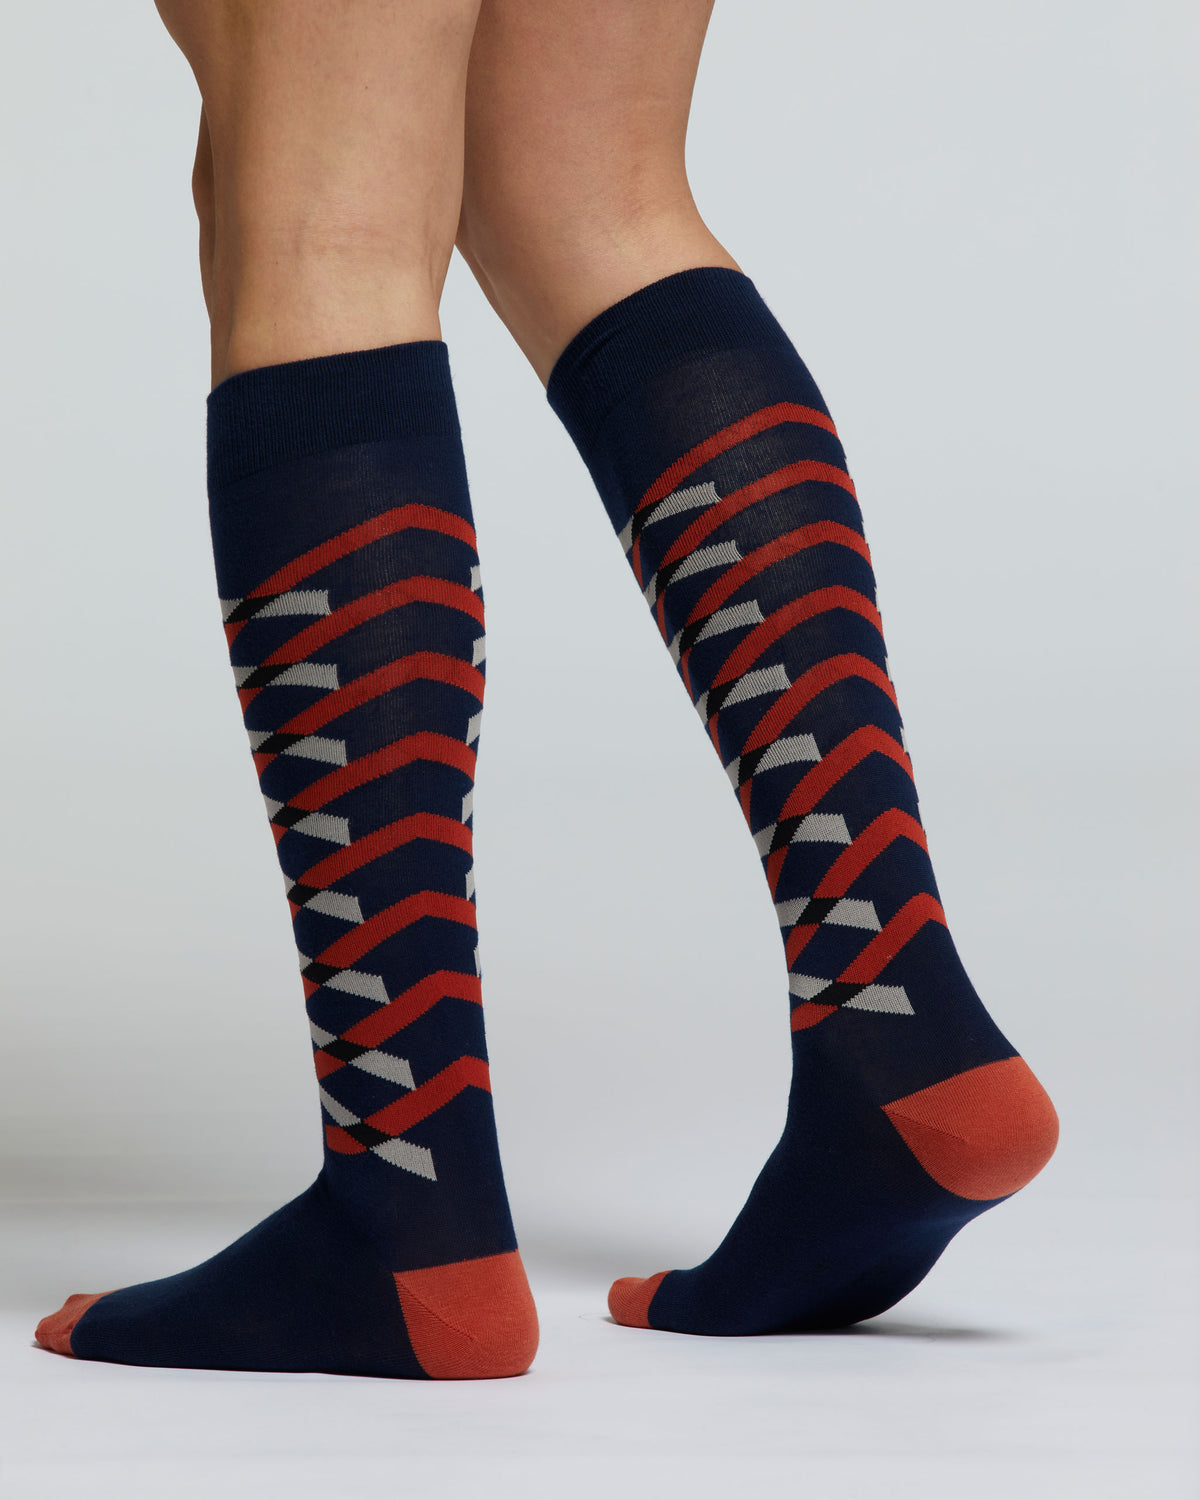 LONG COTTON ROVERE SOCK WITH ENTWINED-STRIPE PATTERN